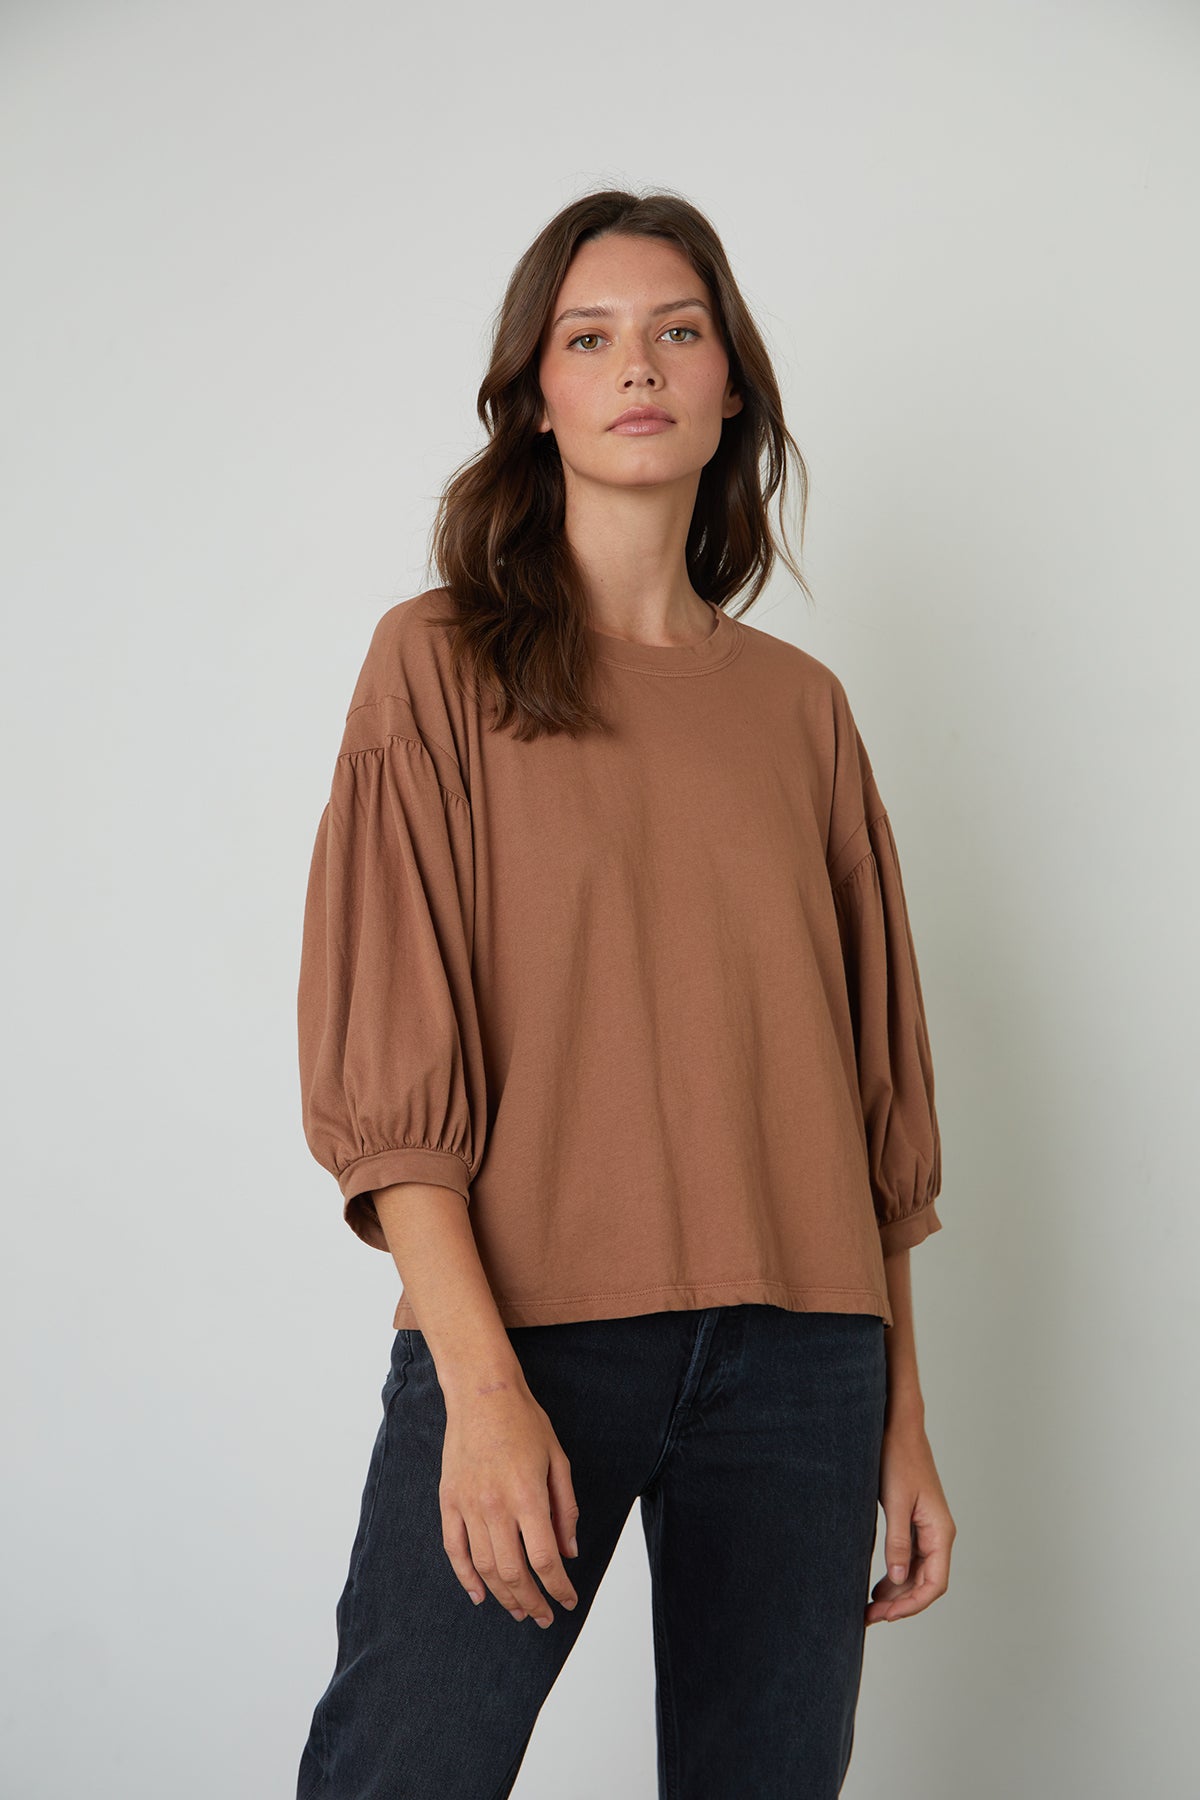   The Prudy 3/4 sleeve tee in tan brings volume to any outfit. 